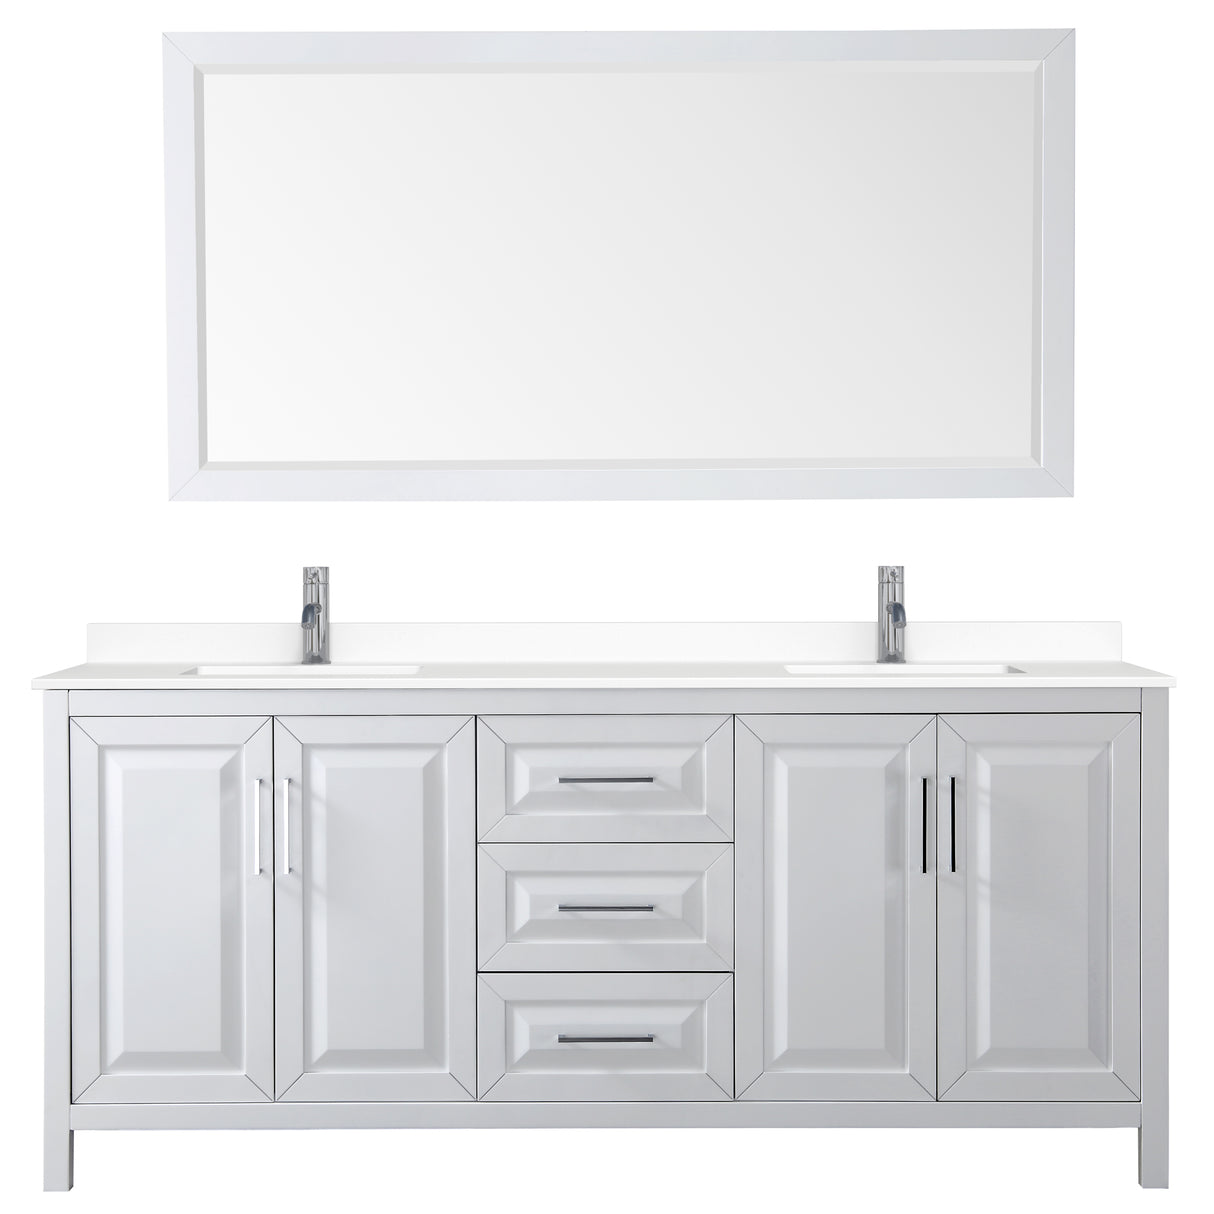 Daria 80 Inch Double Bathroom Vanity in White White Cultured Marble Countertop Undermount Square Sinks 70 Inch Mirror